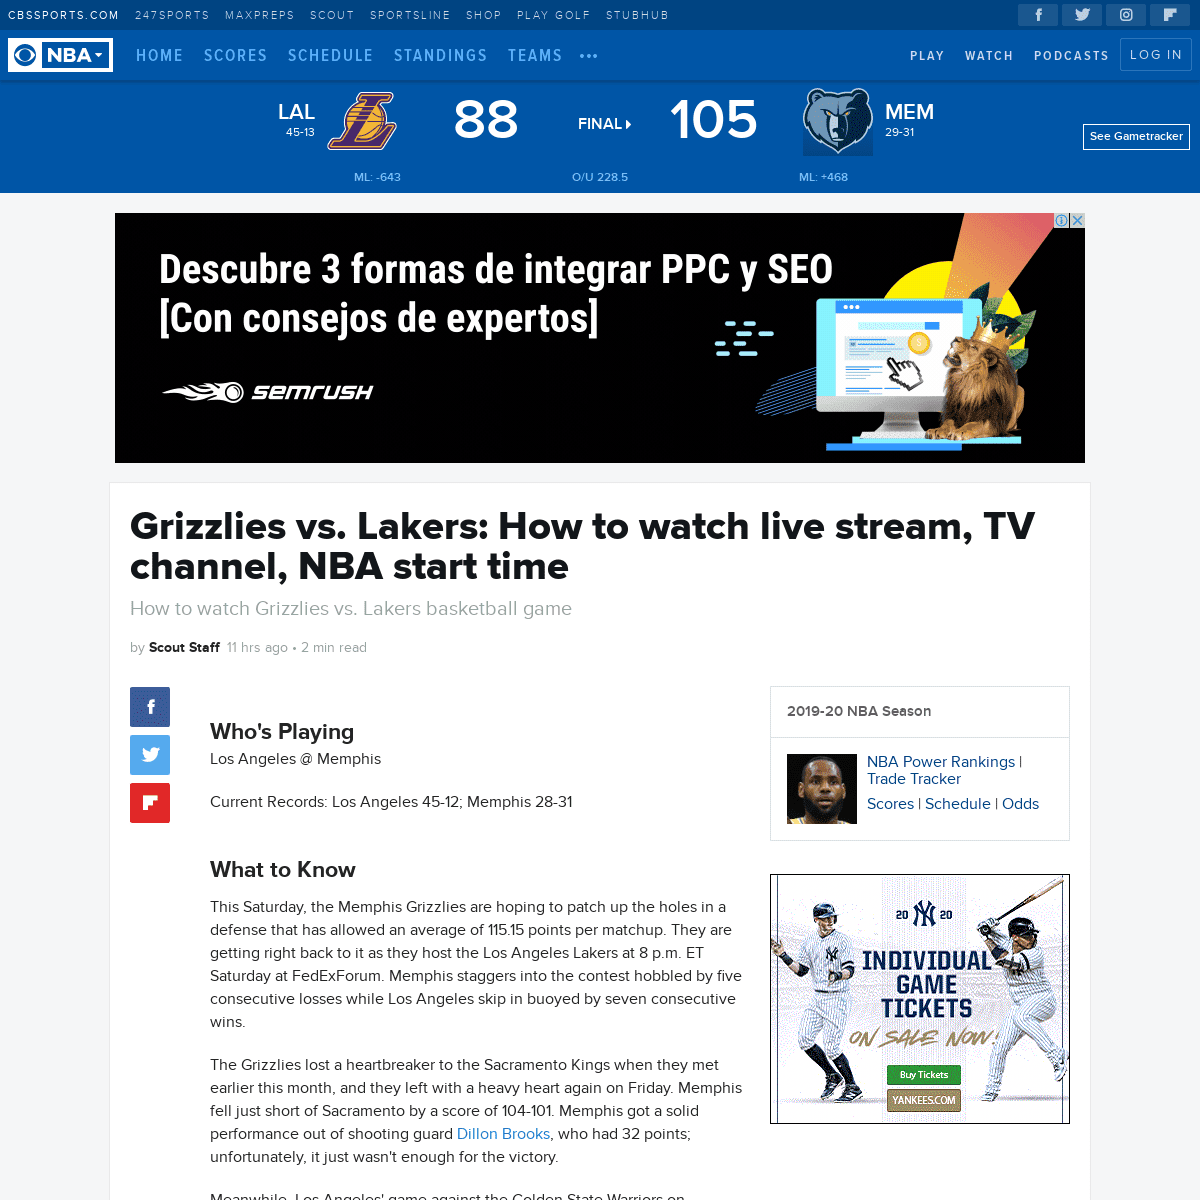 A complete backup of www.cbssports.com/nba/news/grizzlies-vs-lakers-how-to-watch-live-stream-tv-channel-nba-start-time/